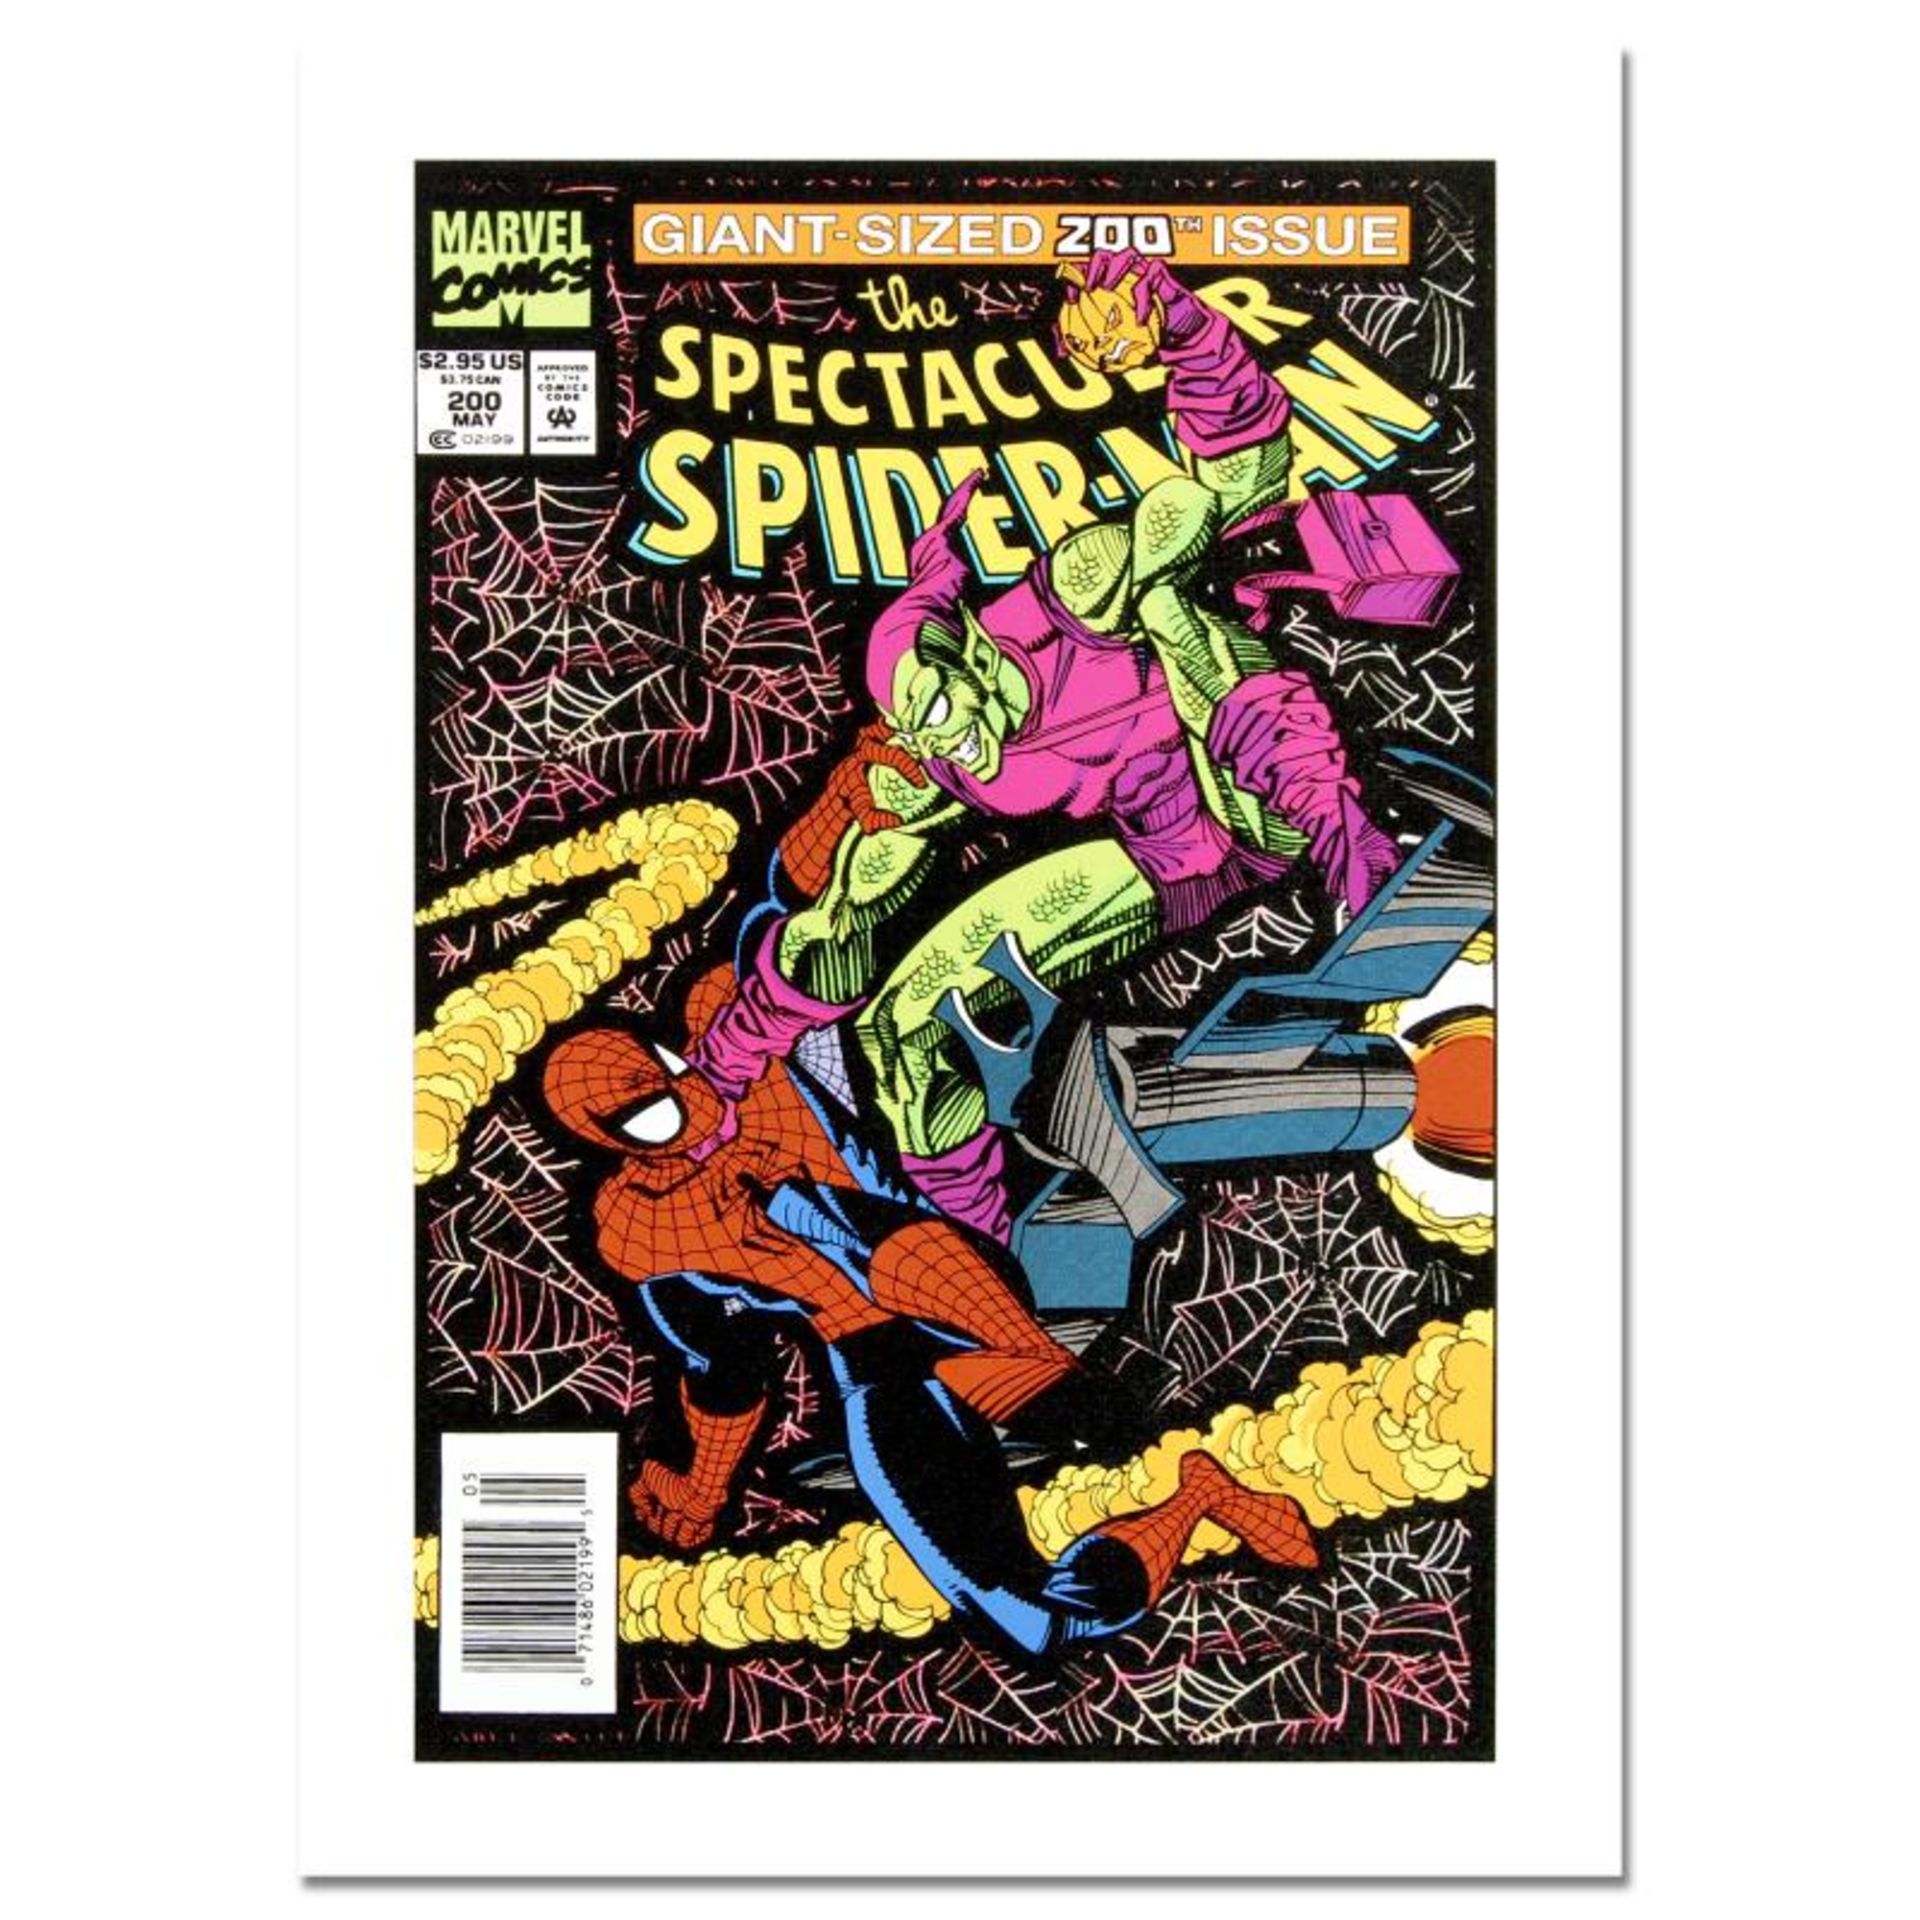 Marvel Comics, "Spectacular Spider-Man #200" Numbered Limited Edition Canvas by